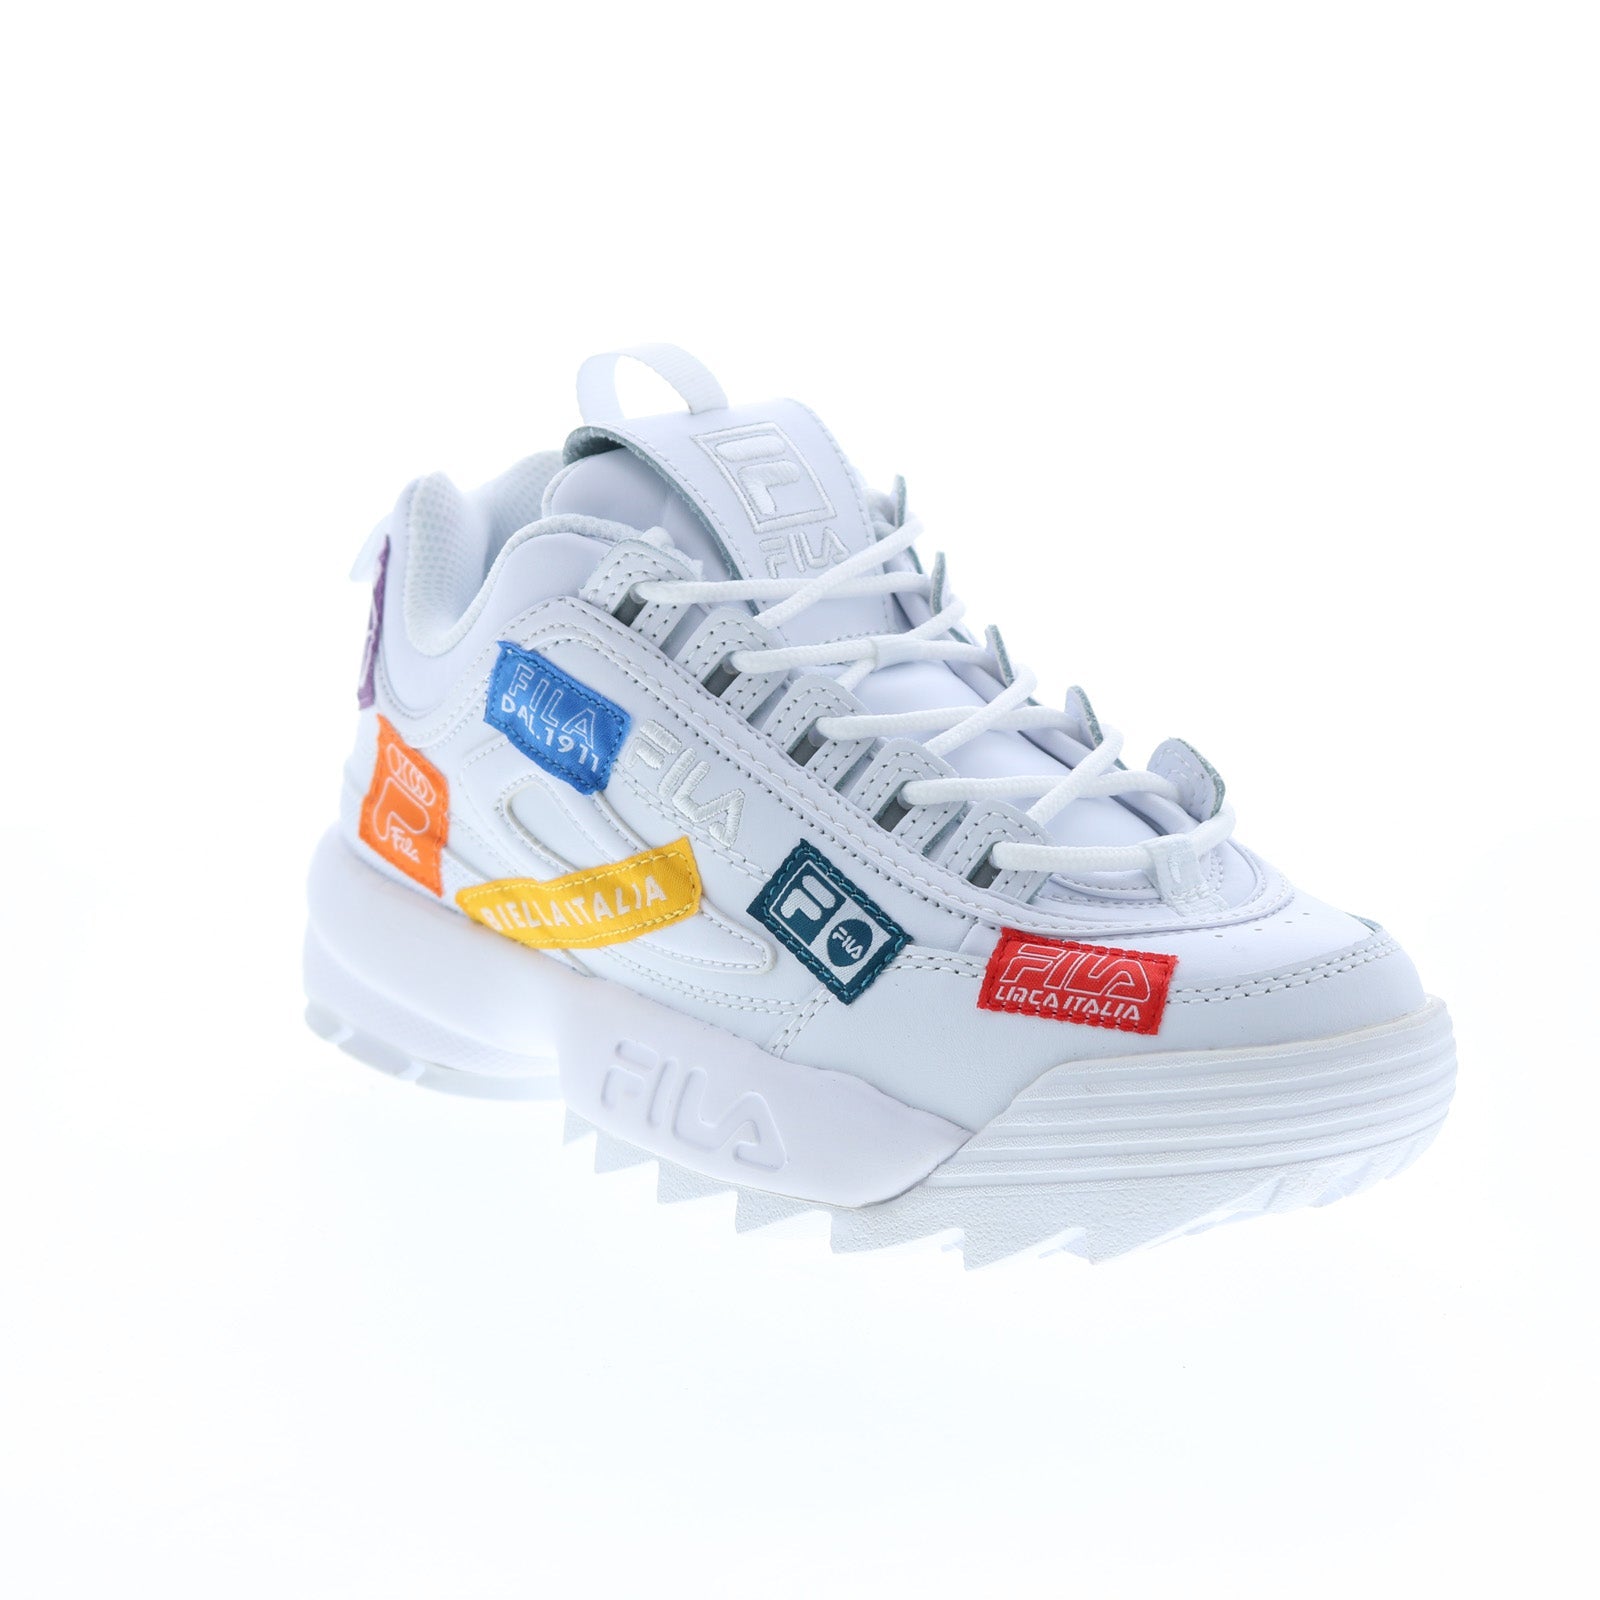 Fila II 110YR Collection Womens Lifestyle Sneakers Sho - Ruze